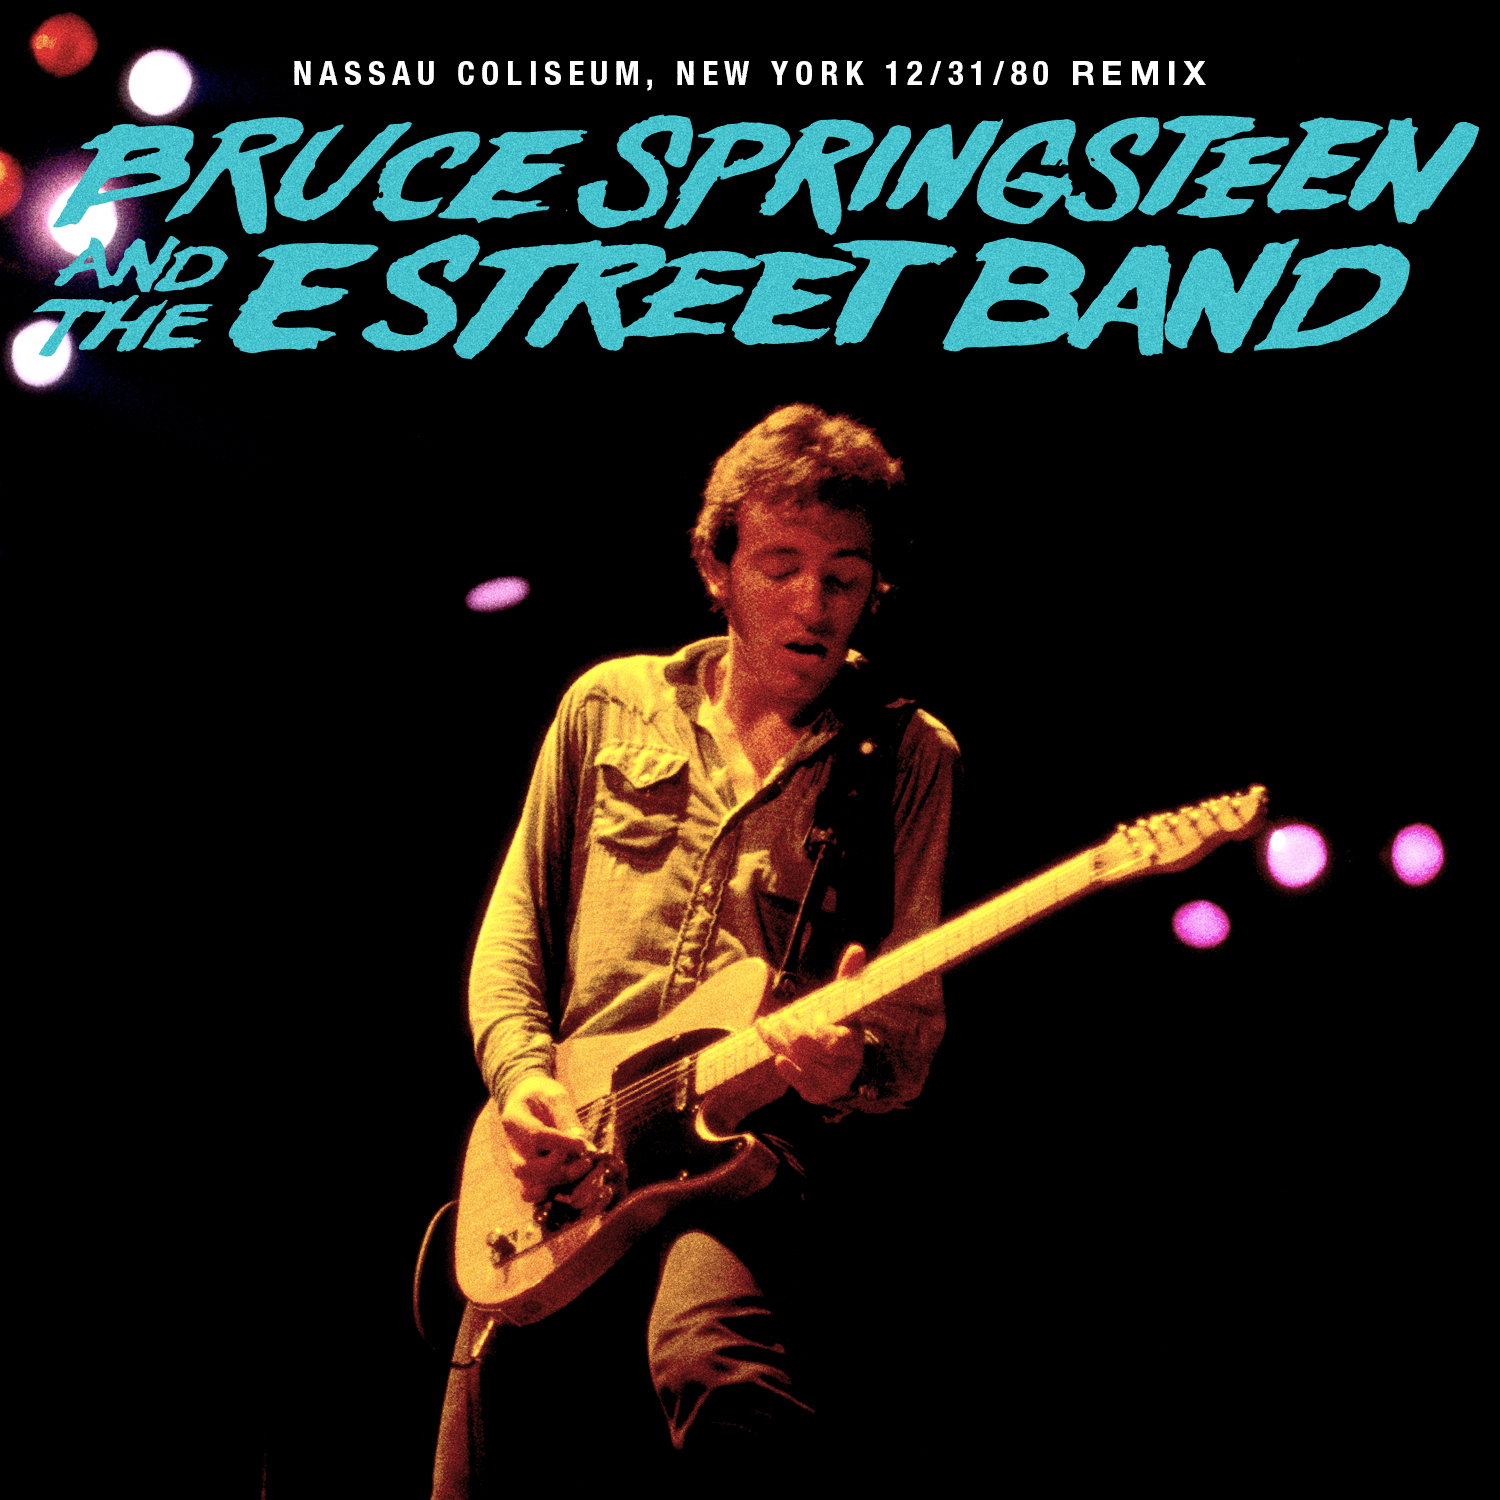 Bruce Springsteen & The E Street Band – 1980-12-31 Nassau Coliseum, New York (Remixed and Remastered) (2019) [FLAC 24bit/192kHz]